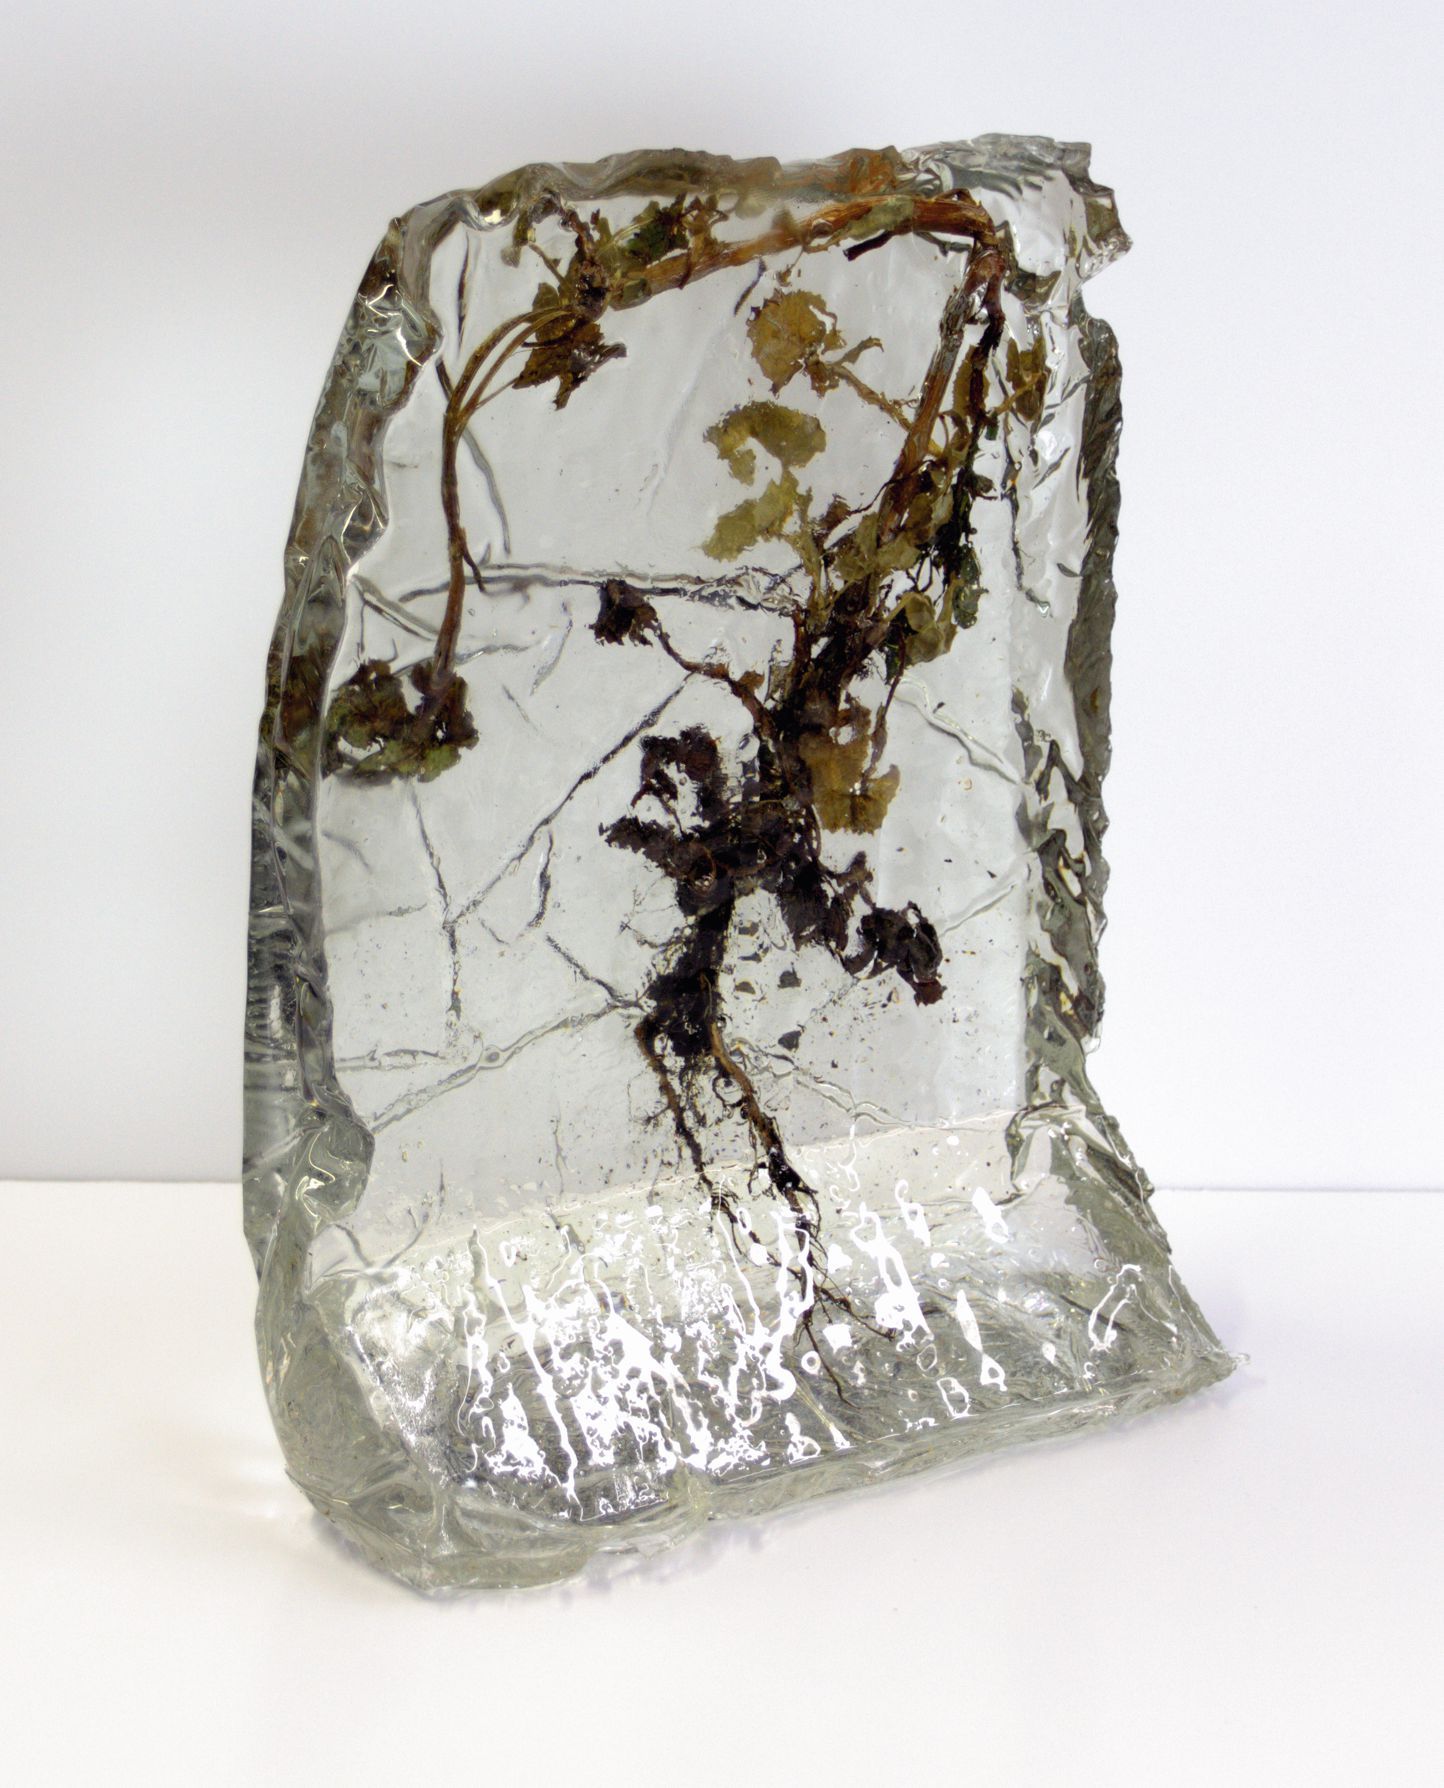  Jim Banks,  Frozen Sow Thistle , Sow Thistle, resin, 11x9x4 